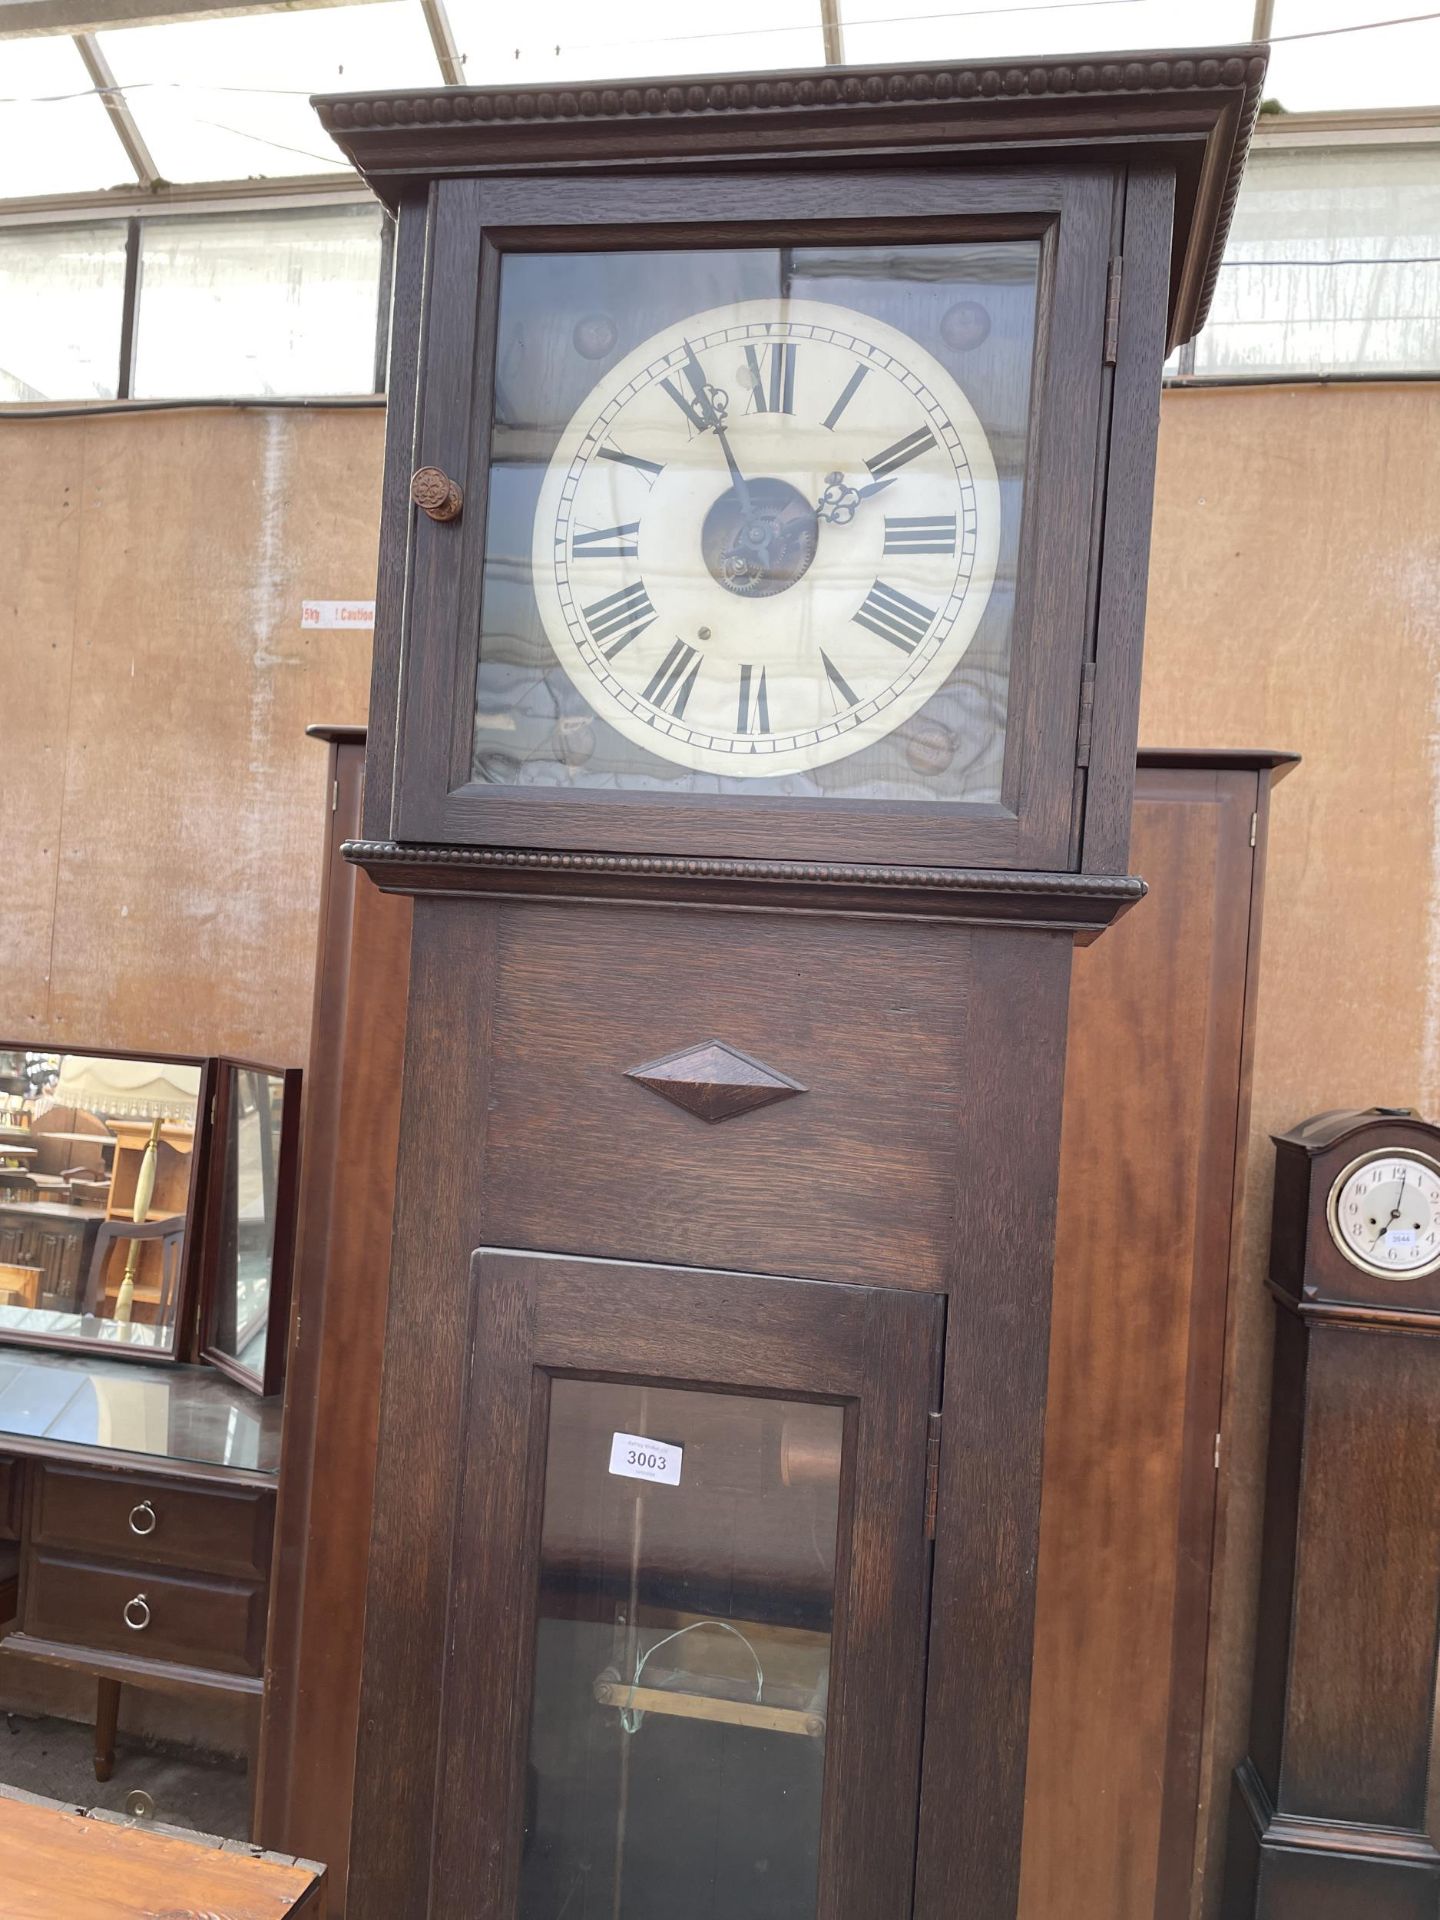 AN EARLY 20TH CENTURY OAK ELECTRIC LONGCASE CLOCK WITH BLACK AND WHITE FACE HAVING ROMAN NUMERALS - Image 5 of 5